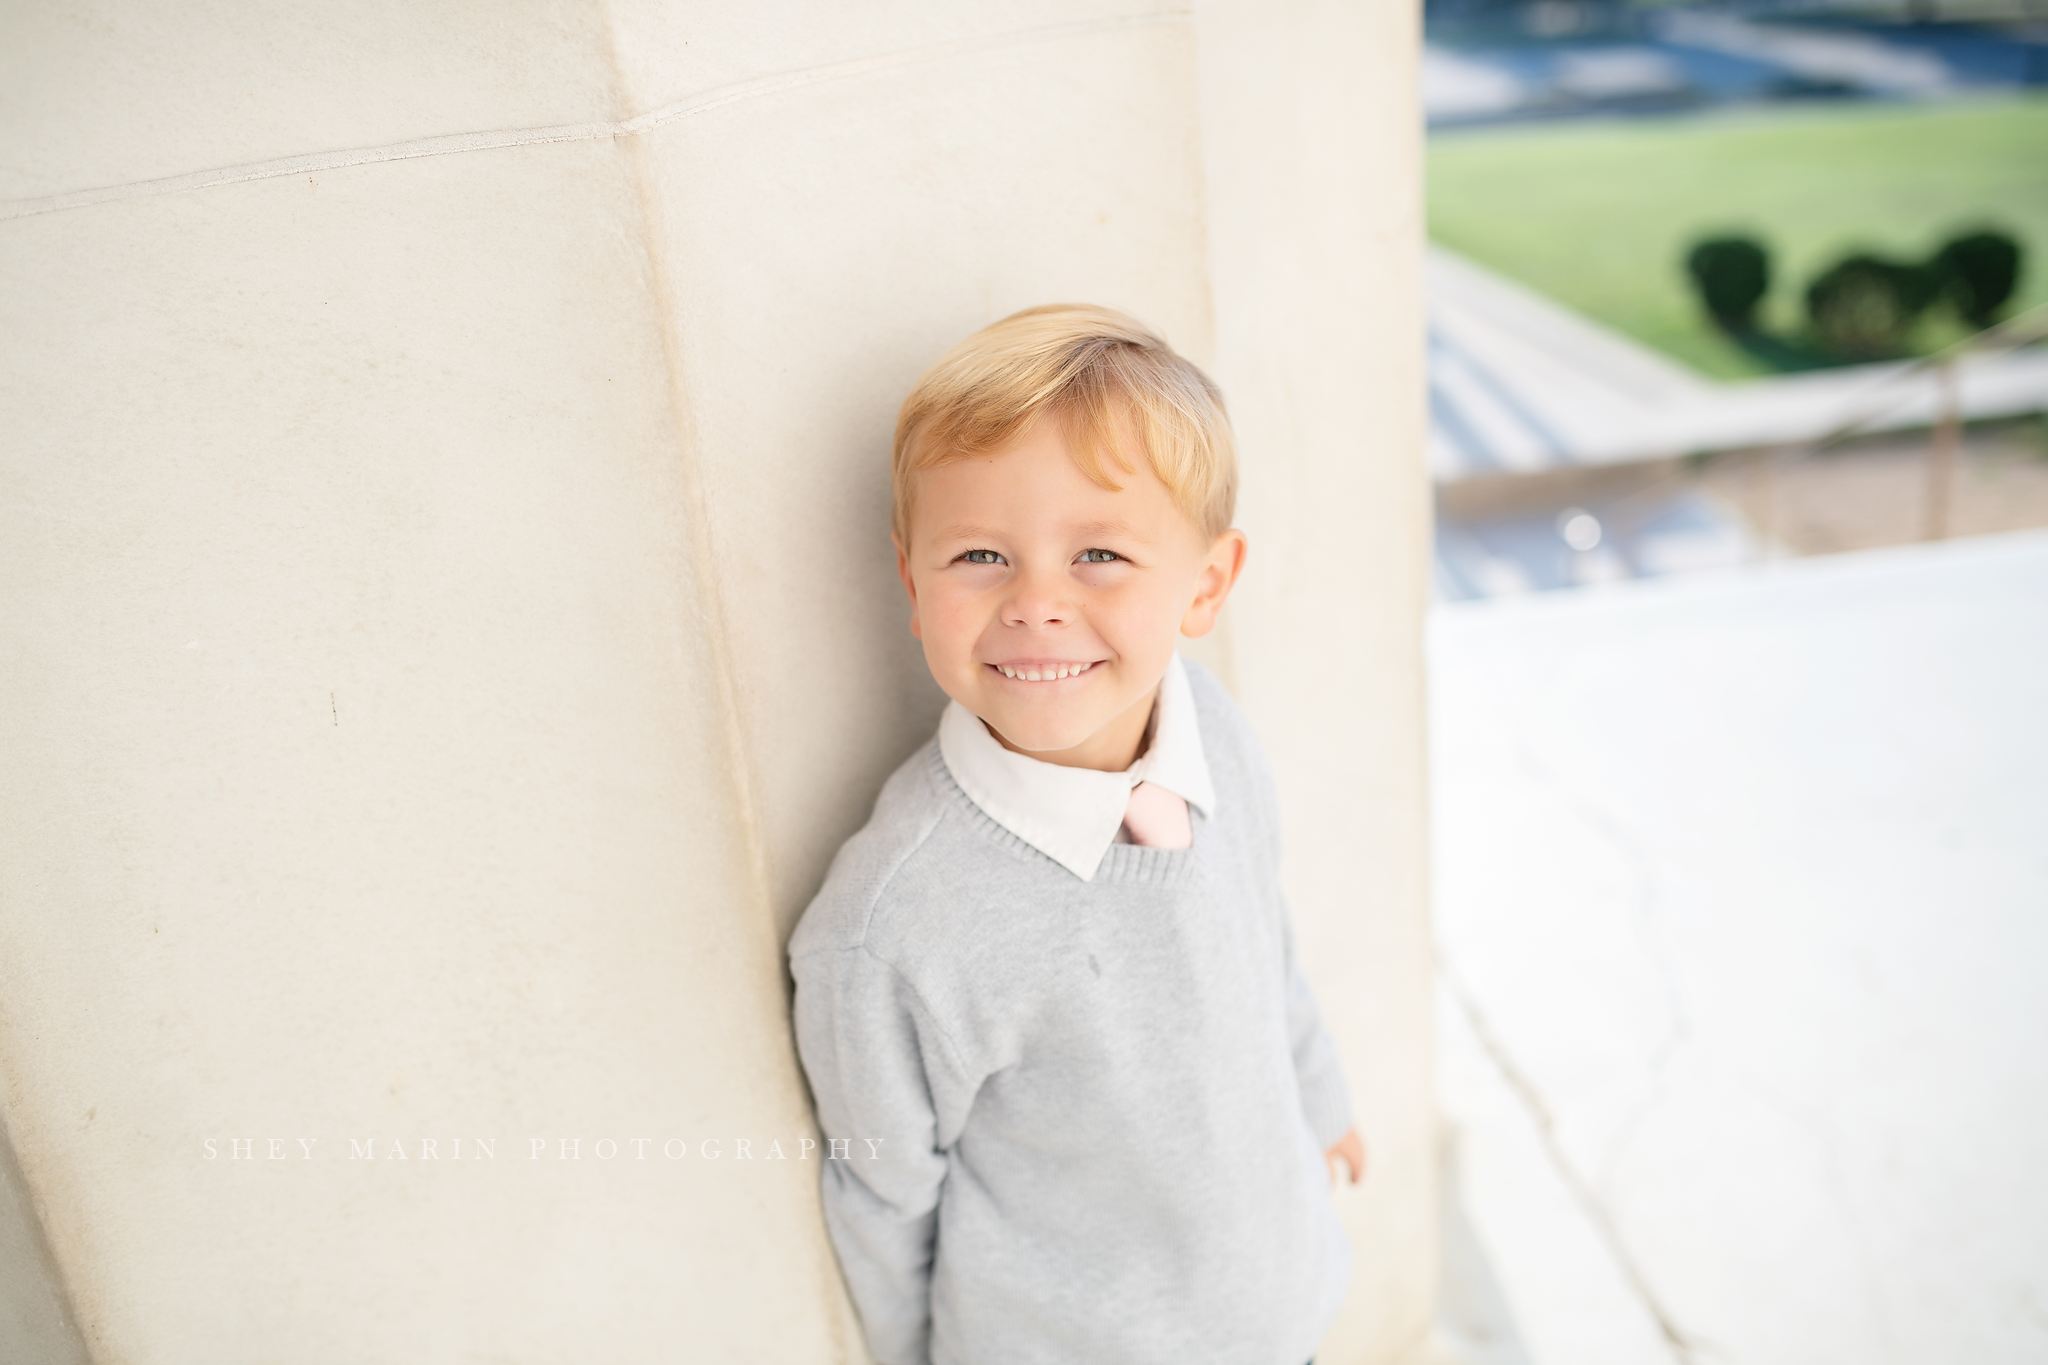 Lincoln Memorial DC monument family photographer